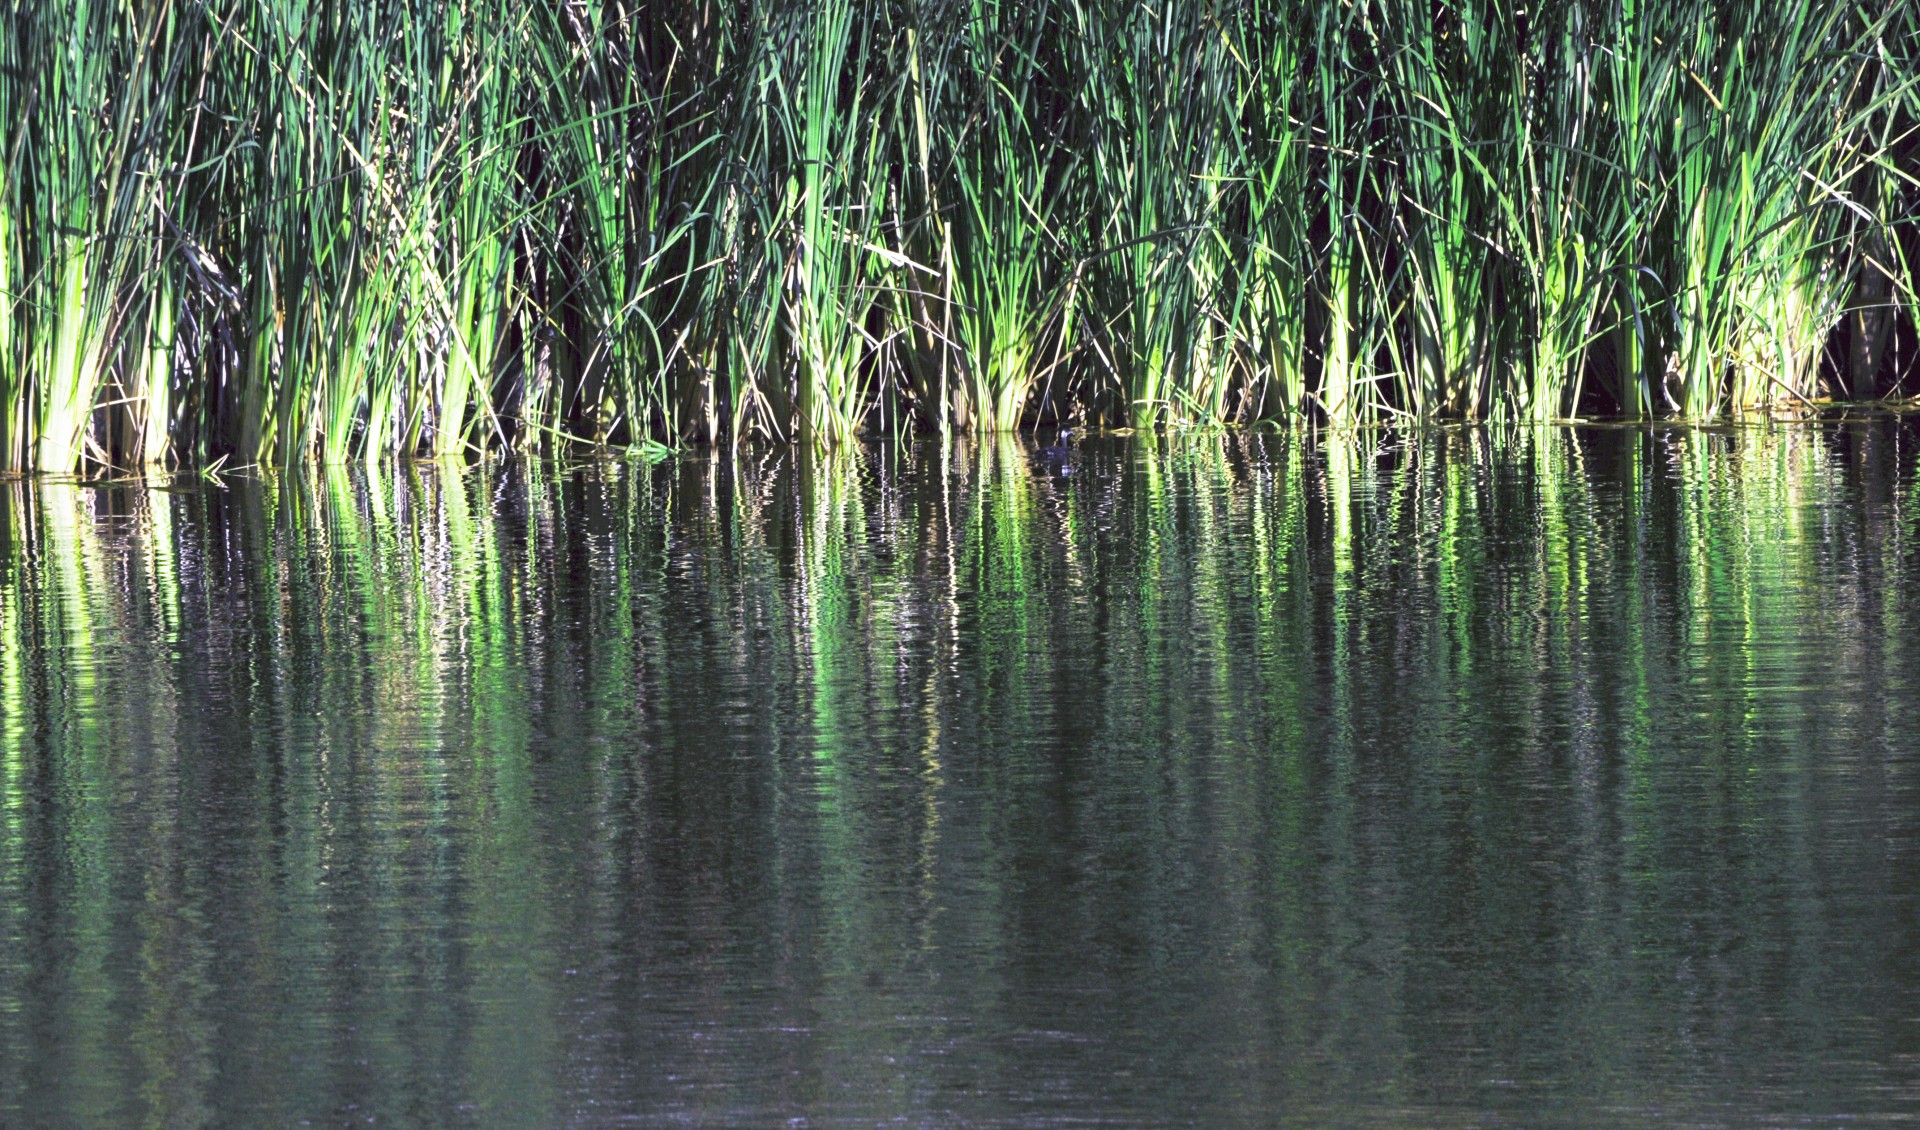 Tall Grass Reflecting In Water